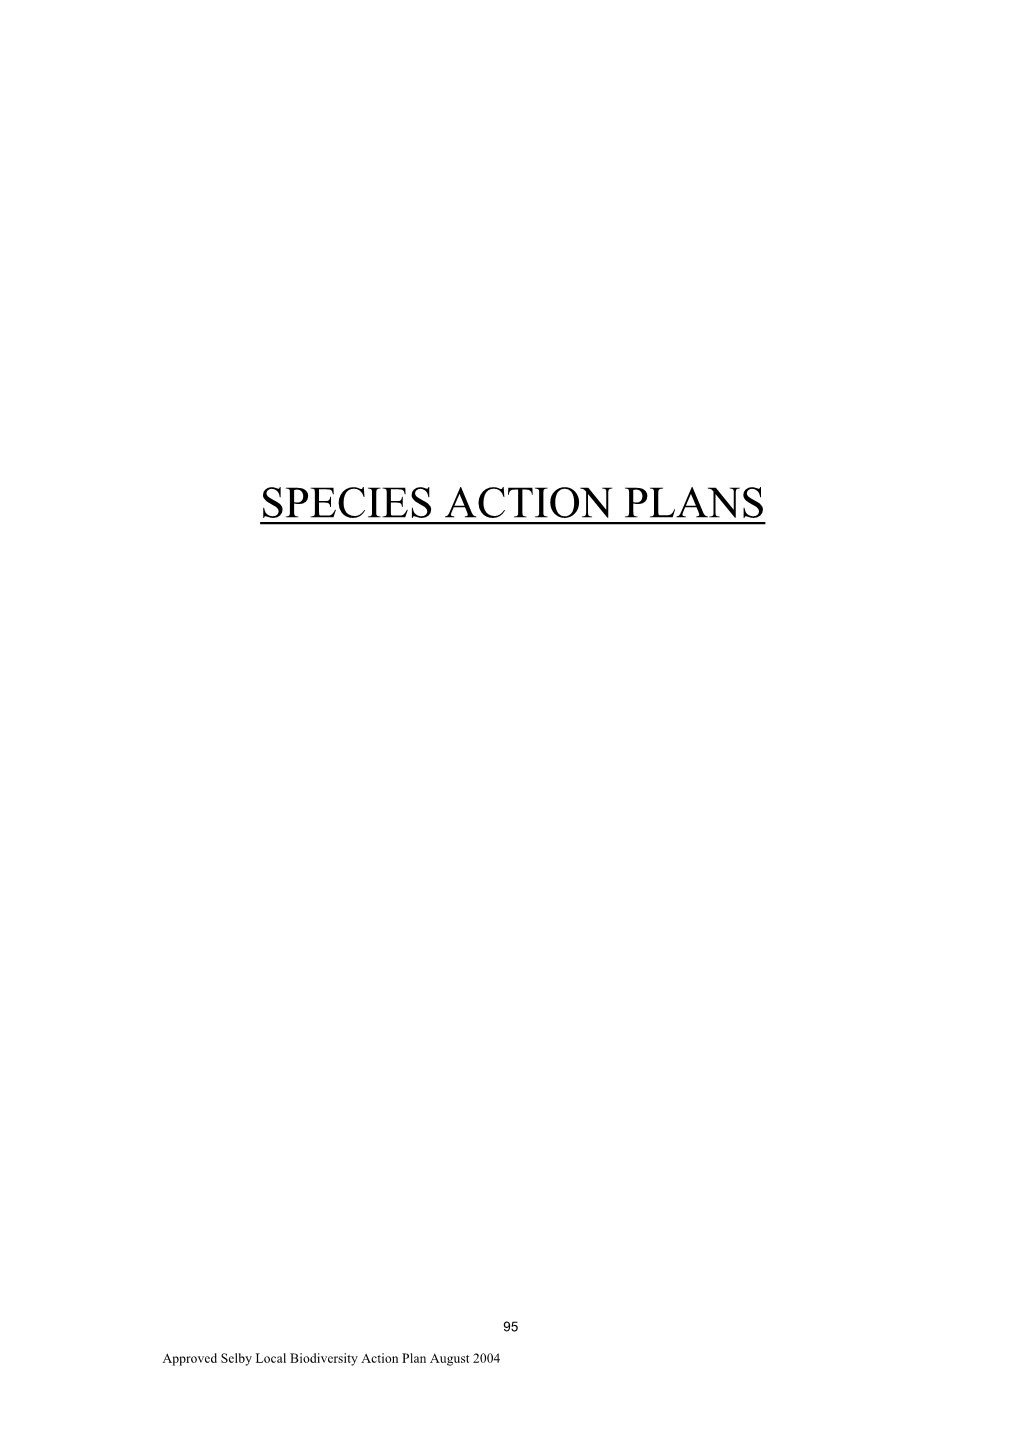 Selby BAP Species Action Plans